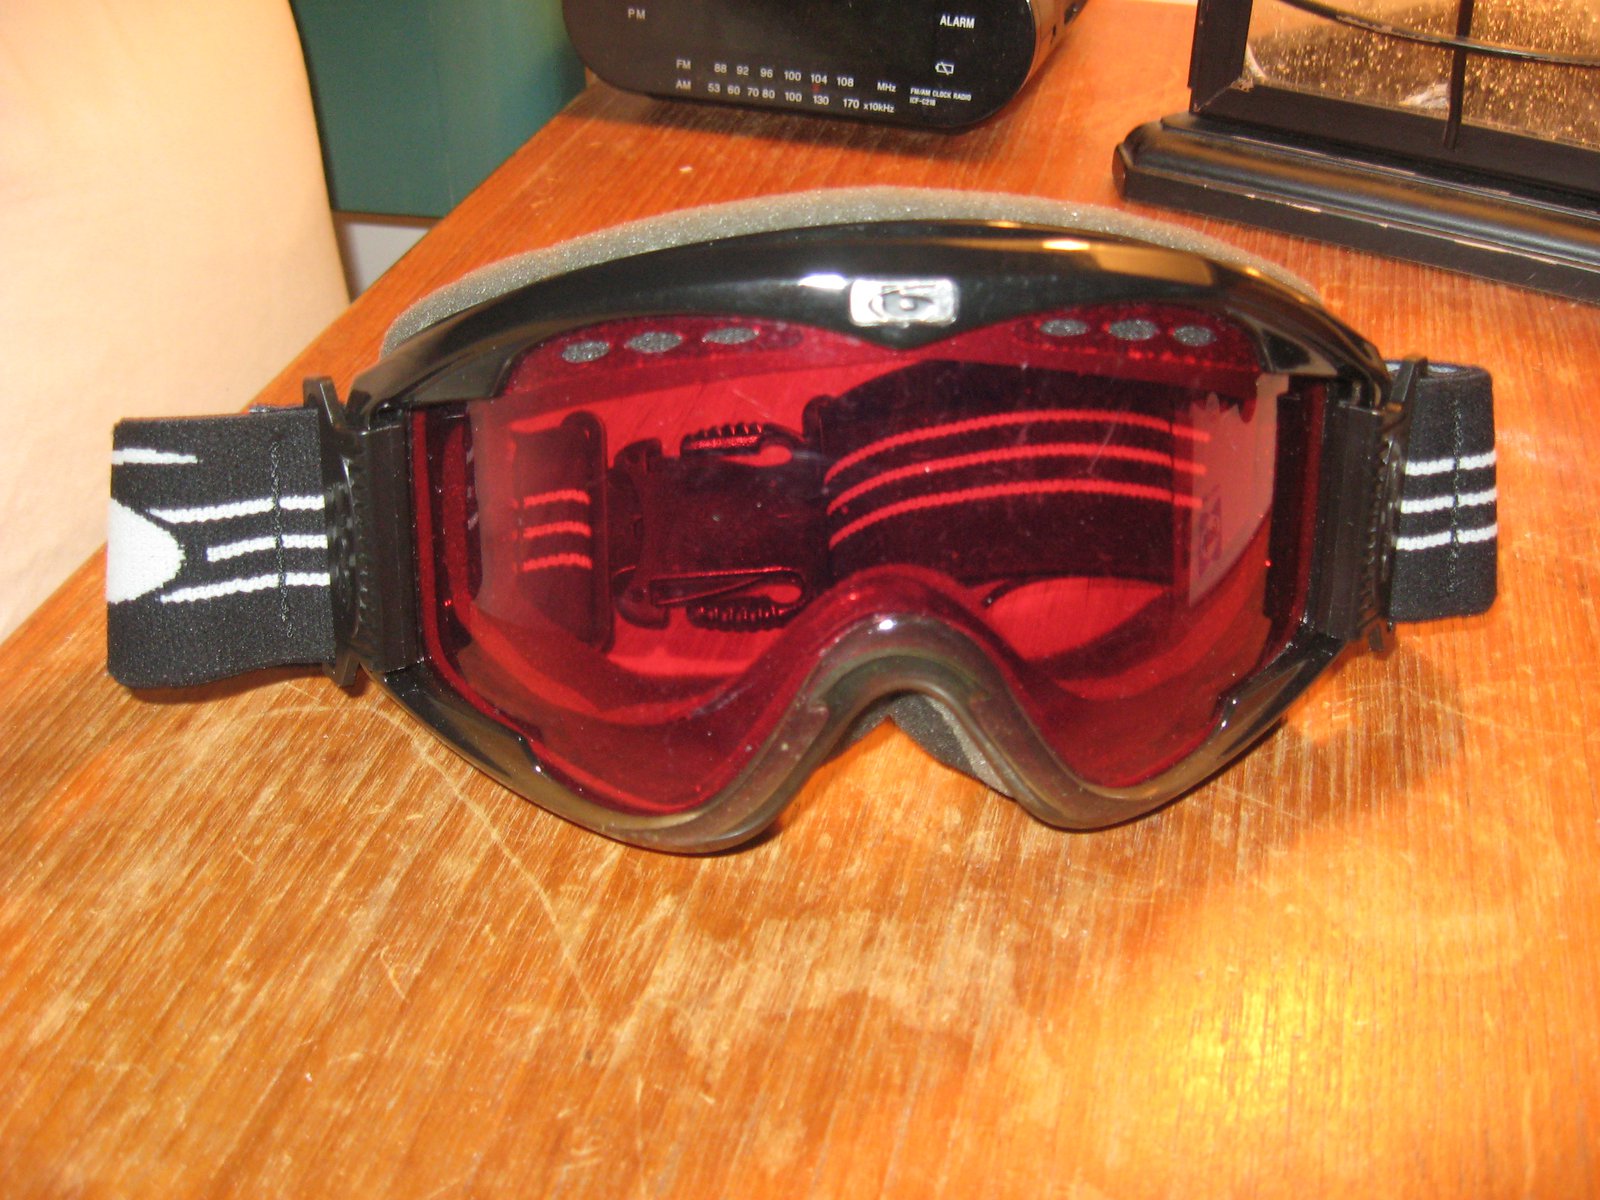 Bolle Goggles